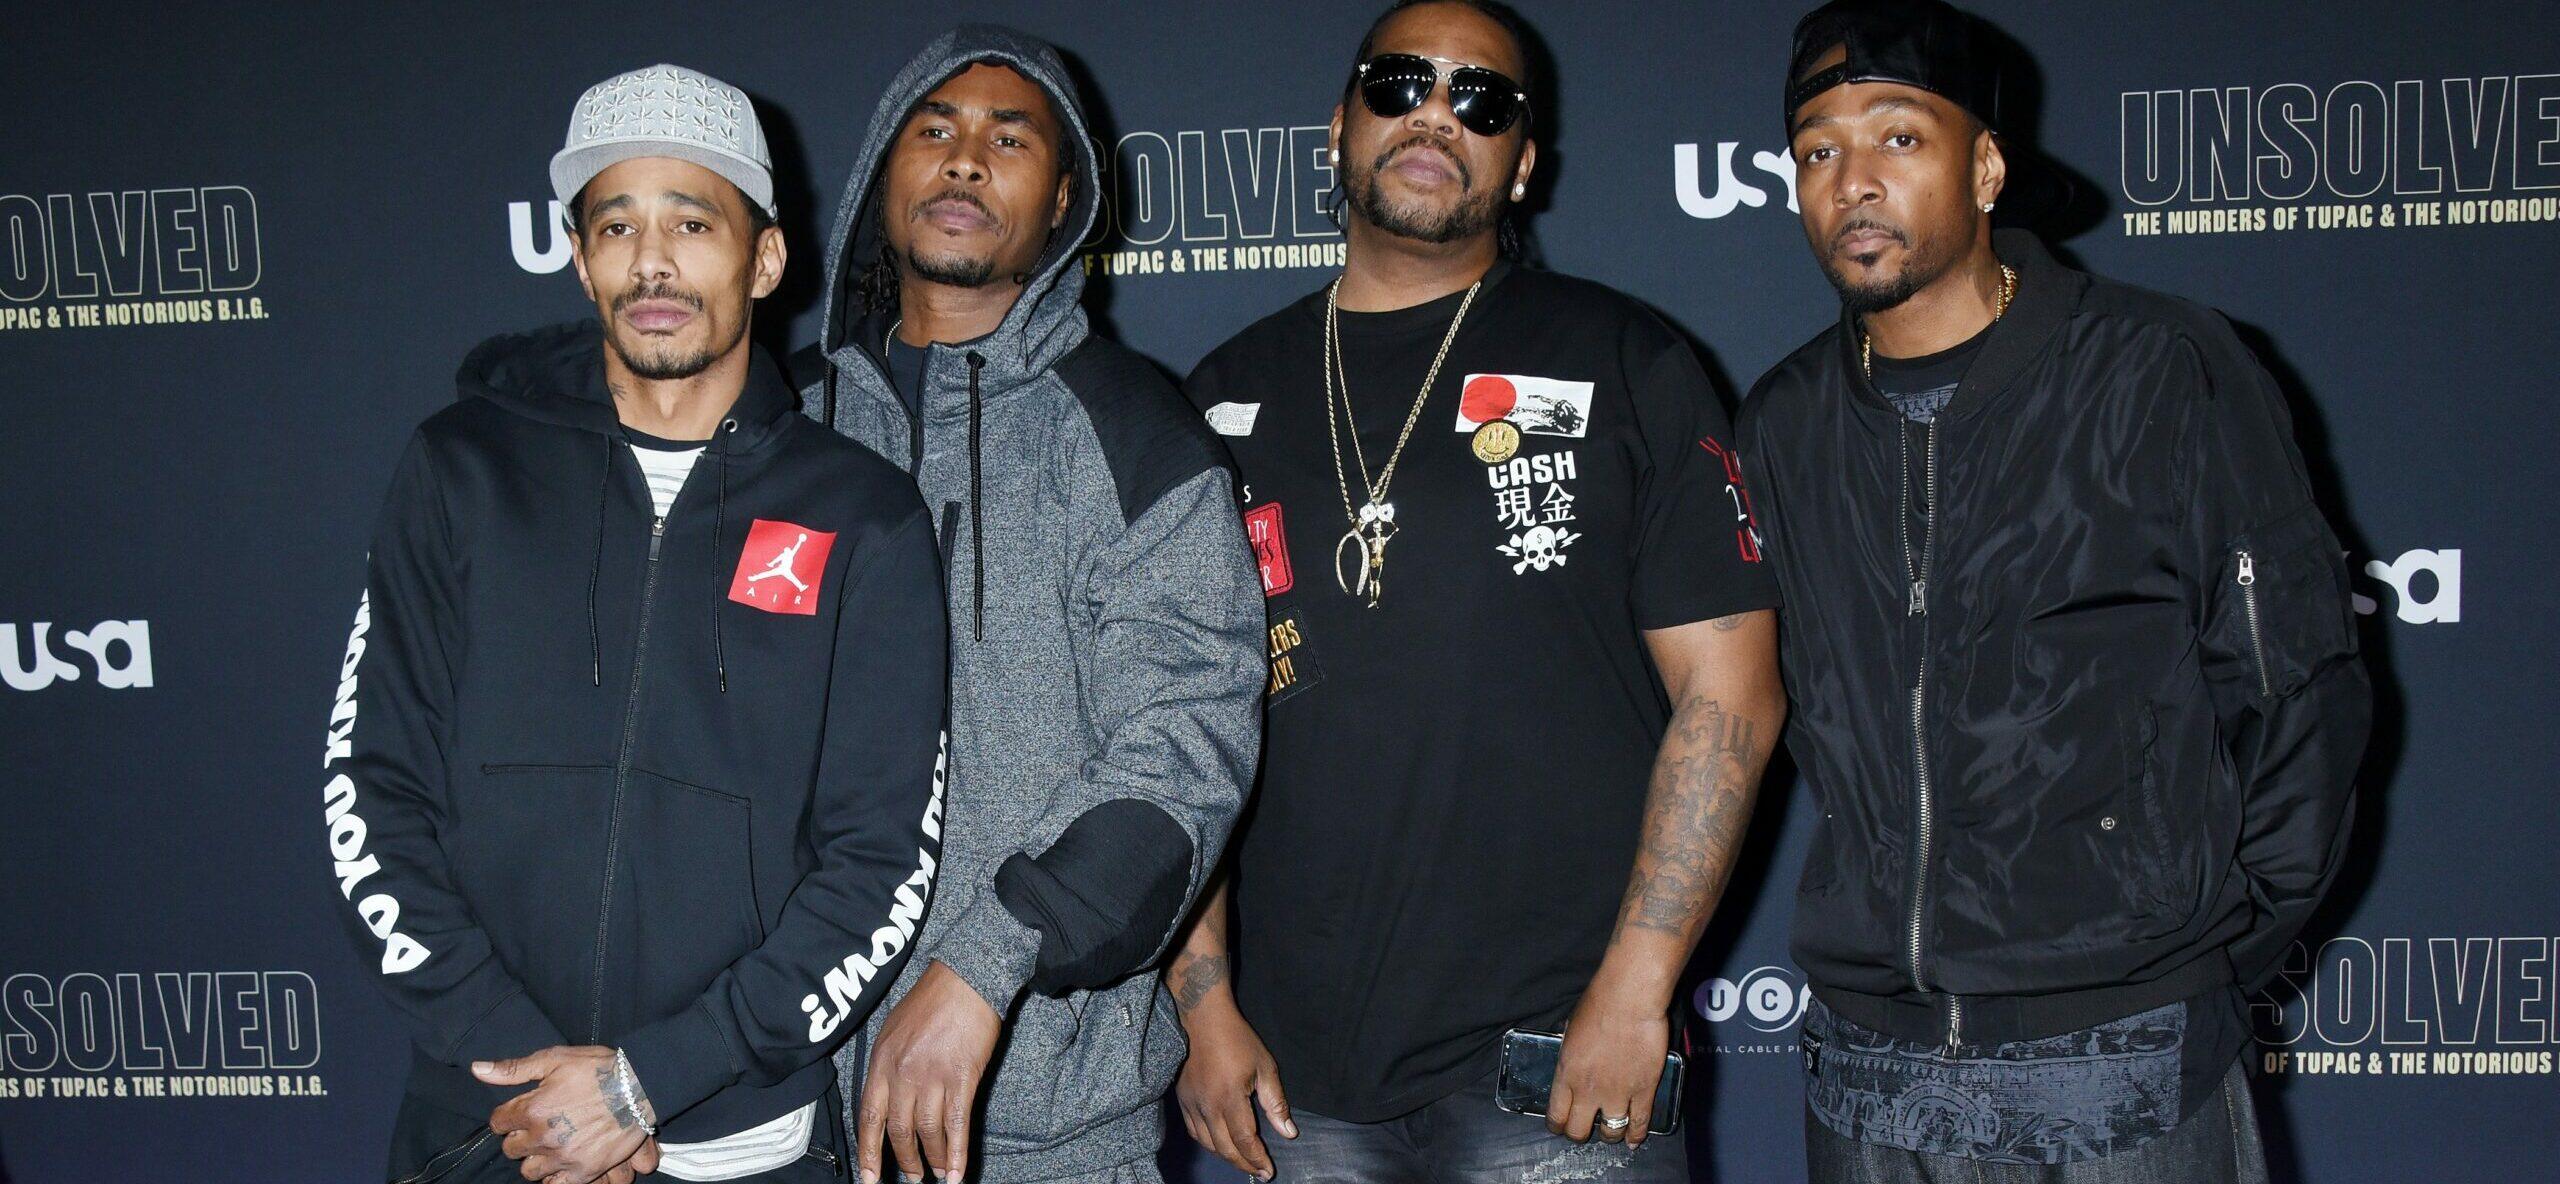 Bone Thugs-N-Harmony Perform 'Crossroads' At Legendary Producer's Sons Funeral